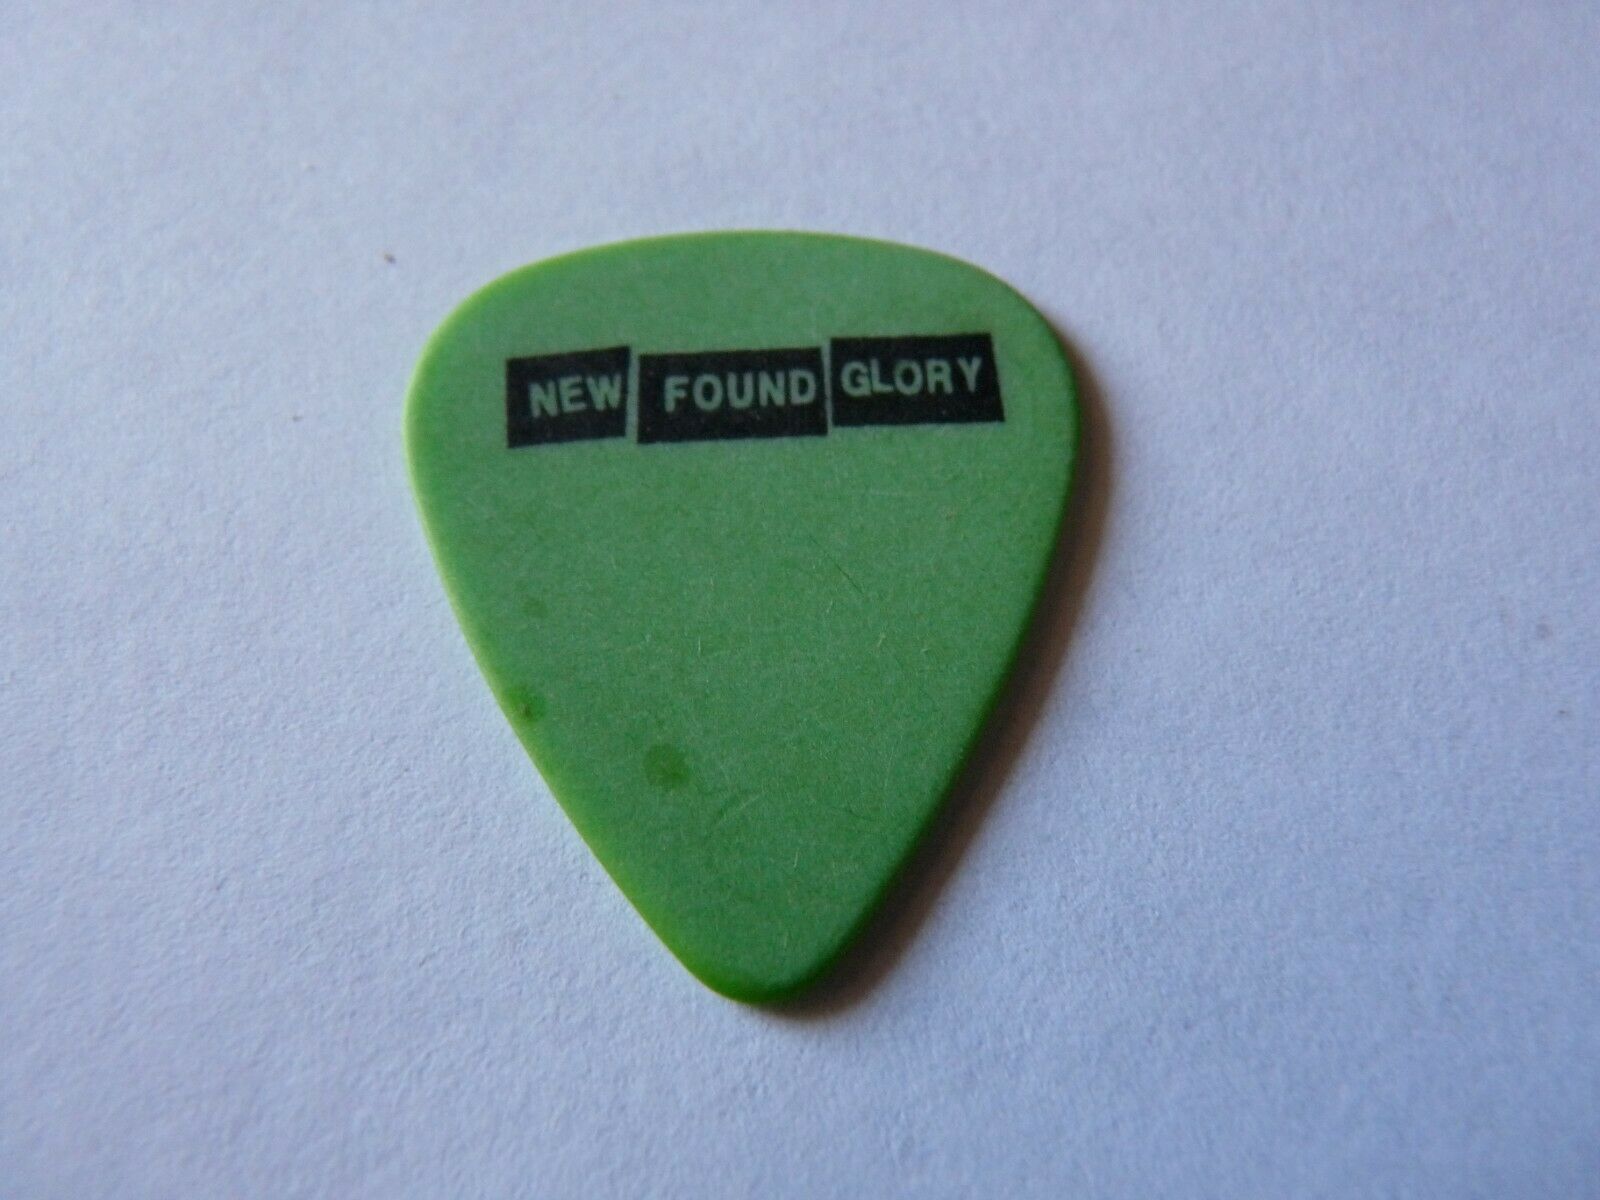 NEW FOUND GLORY BLACK ON GREEN VINTAGE 2003 CONCERT TOUR ISSUED GUITAR PICK COLLECTIBLE MEMORABILIA